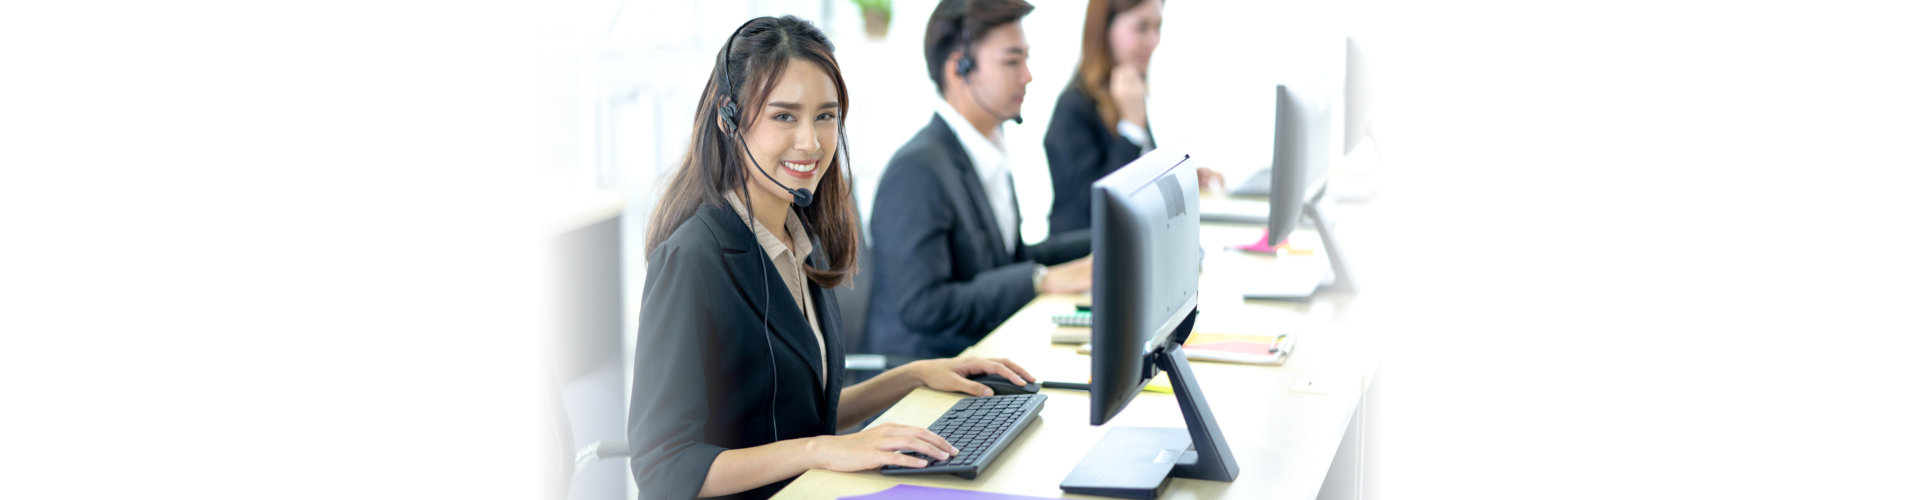 Call center worker accompanied by her team